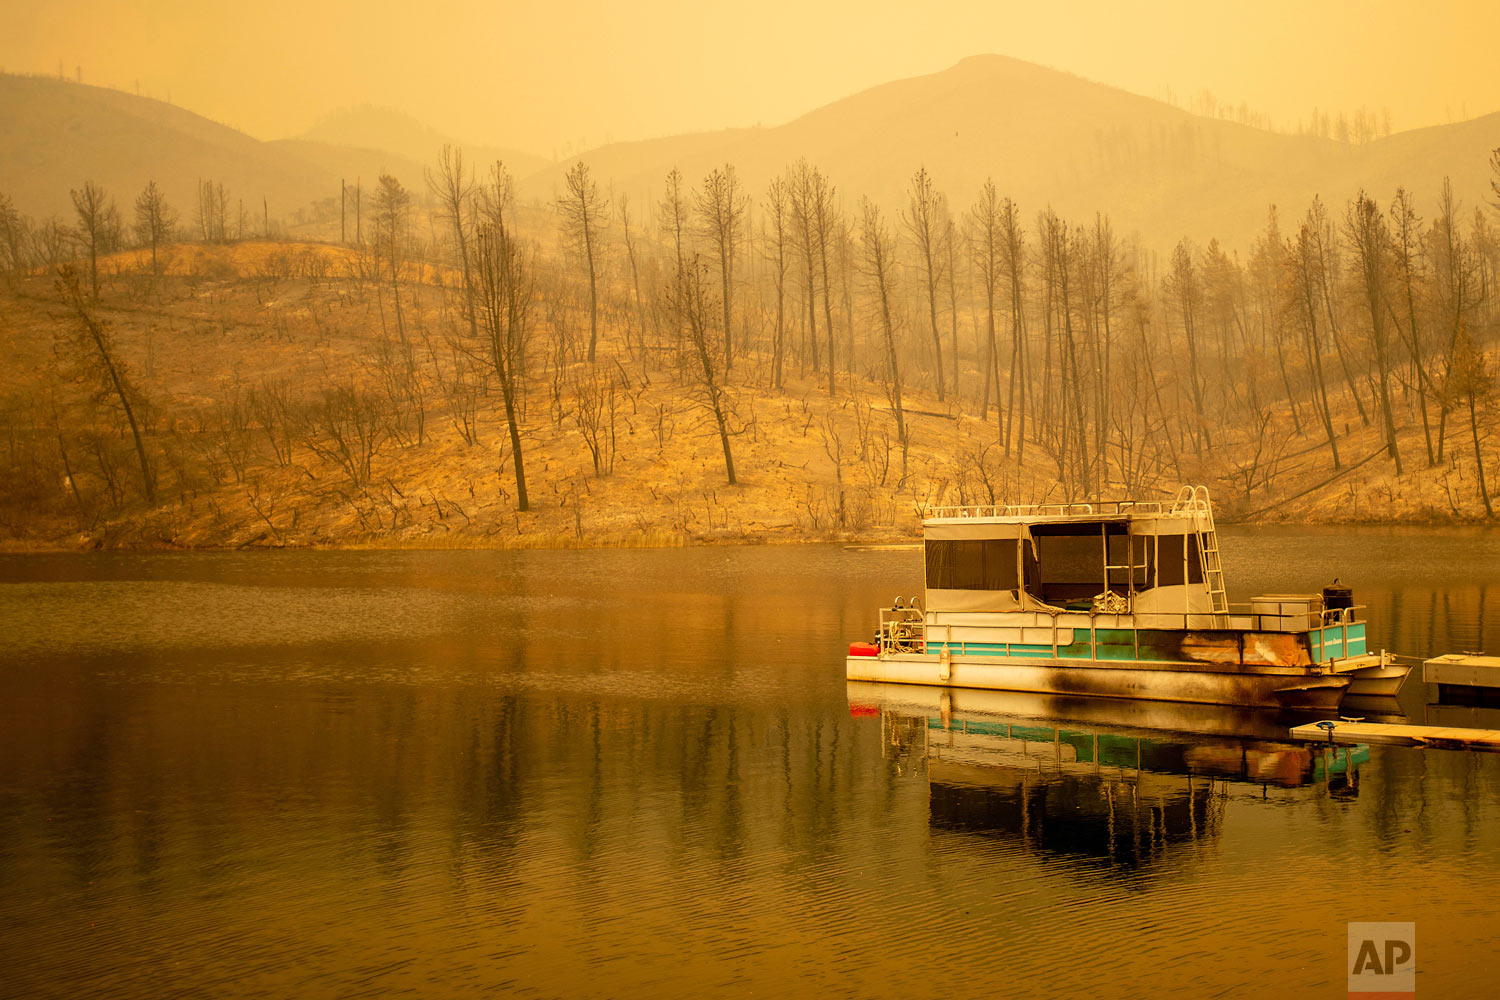  A boat scorched by the Carr Fire floats on Whiskeytown Lake in Whiskeytown, Calif., on Friday, July 27, 2018. The flames moved so fast that firefighters working in oven-like temperatures and bone-dry conditions had to drop efforts to battle the blaz